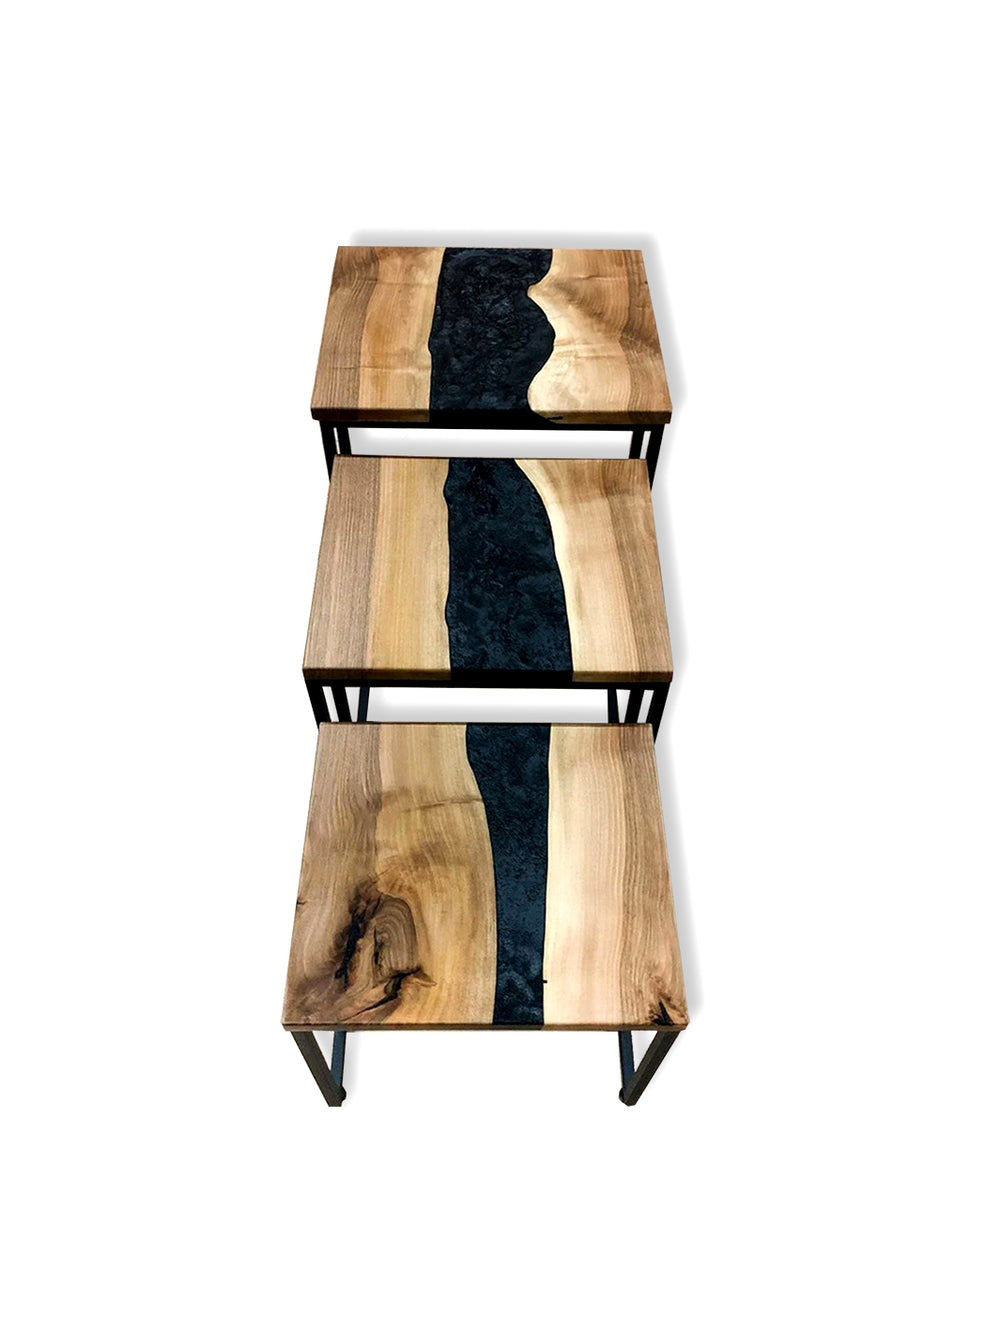 Set of 3 Handcrafted Black Walnut Epoxy River Resin Nesting Coffee Table Harden Coffee Tables HWC-0658-1